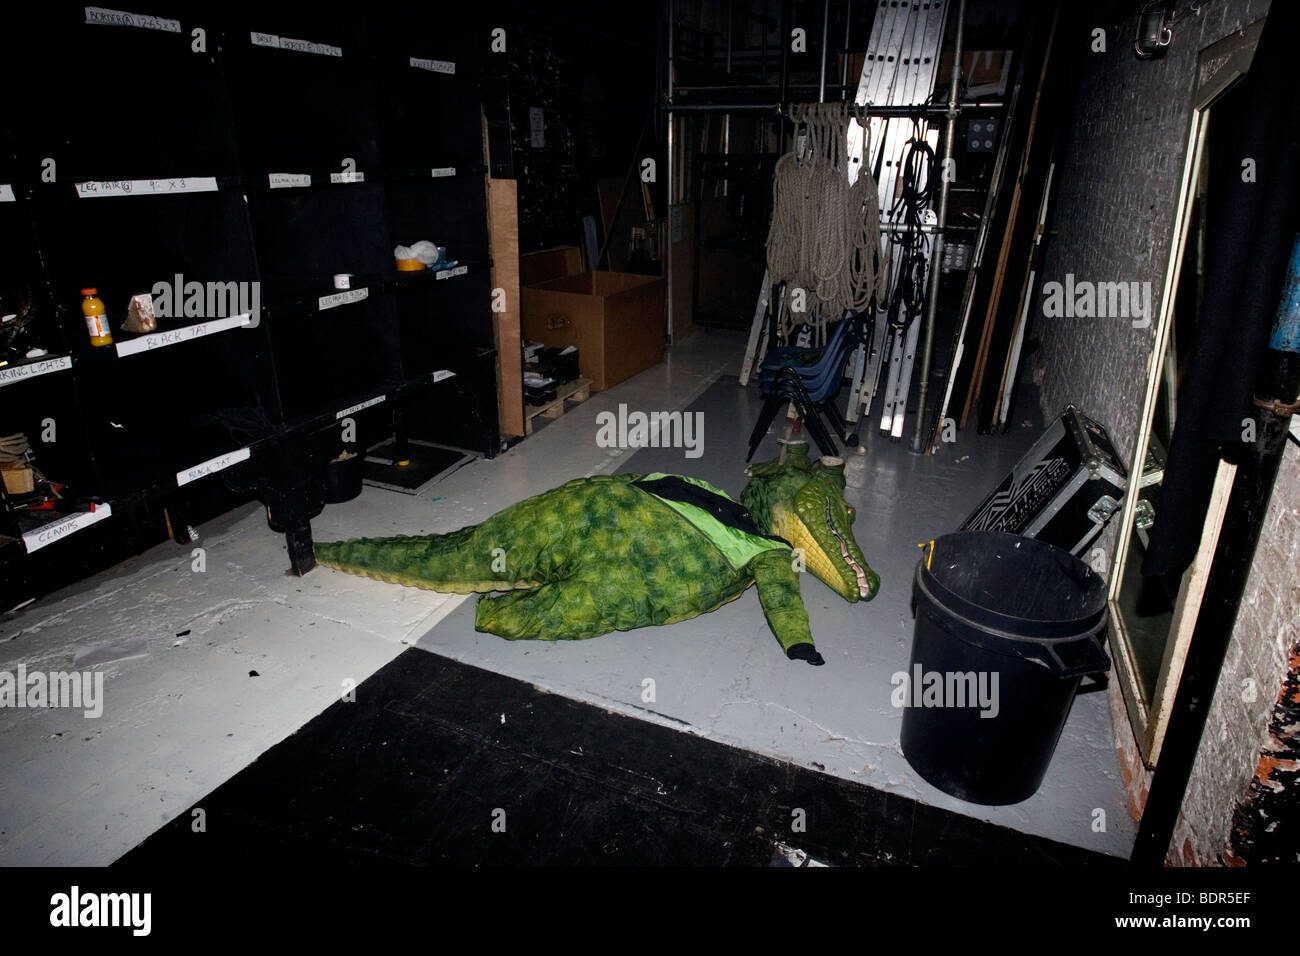 A crocodile costume is pictured laying on the floor backstage at the Theatre Royal, Brighton, East Sussex, UK. Stock Photo